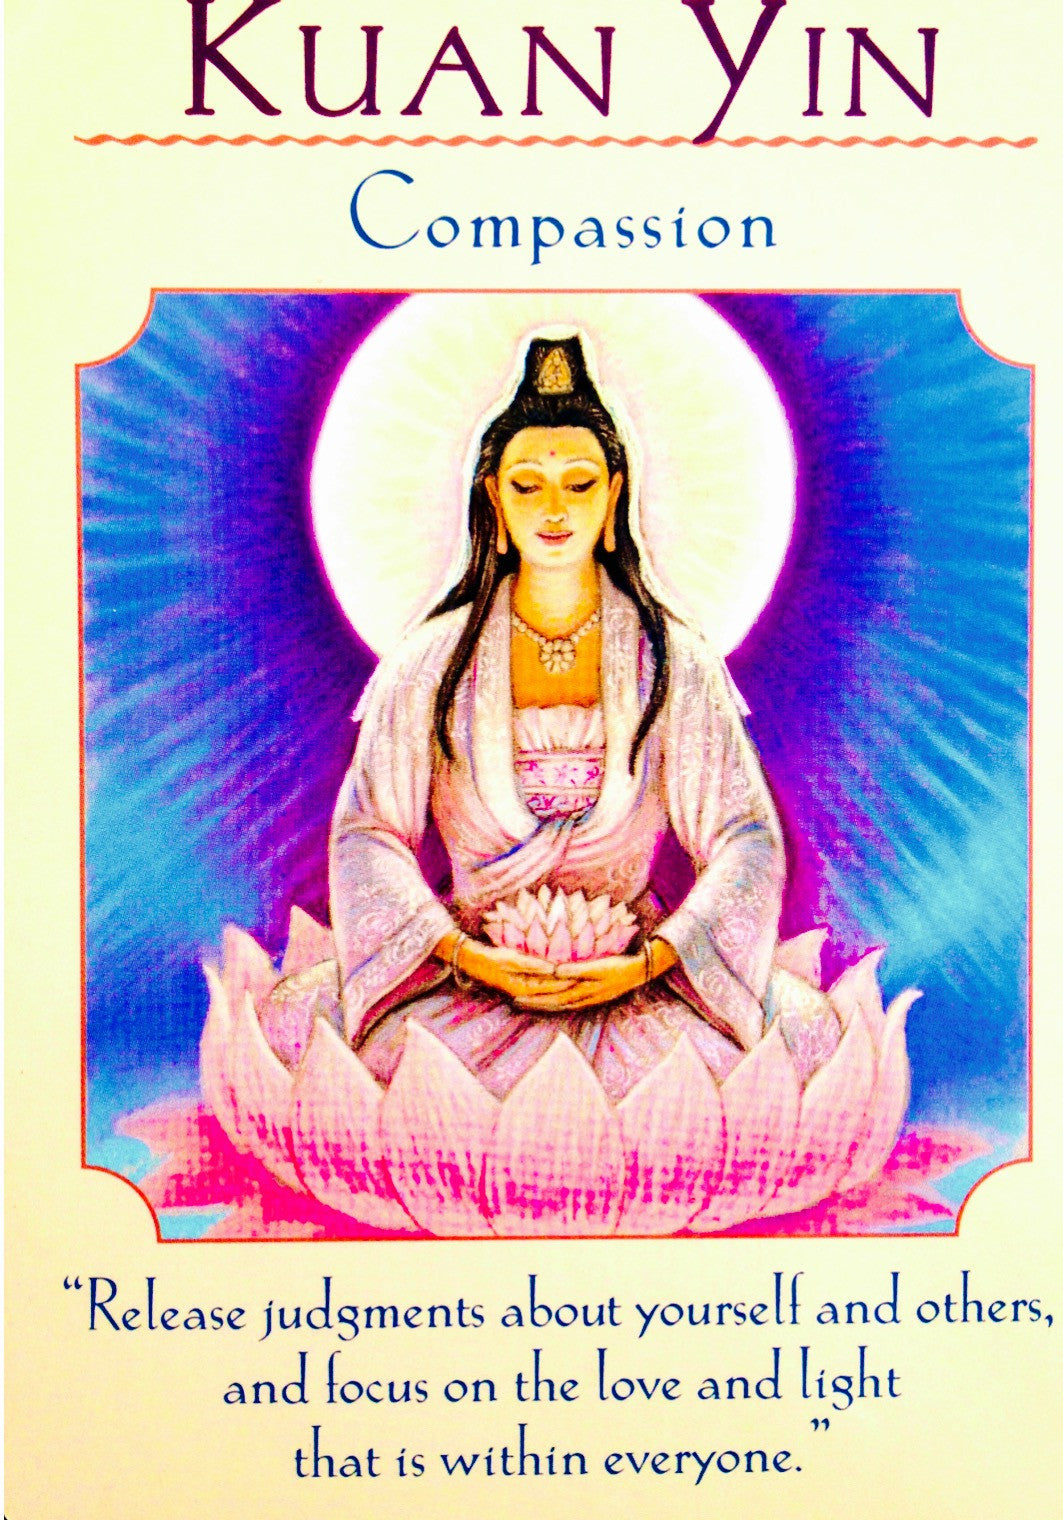 Kuan Yin ~ Compassion: “Release judgments about yourself and others, and focus on the love and light that is within everyone.”